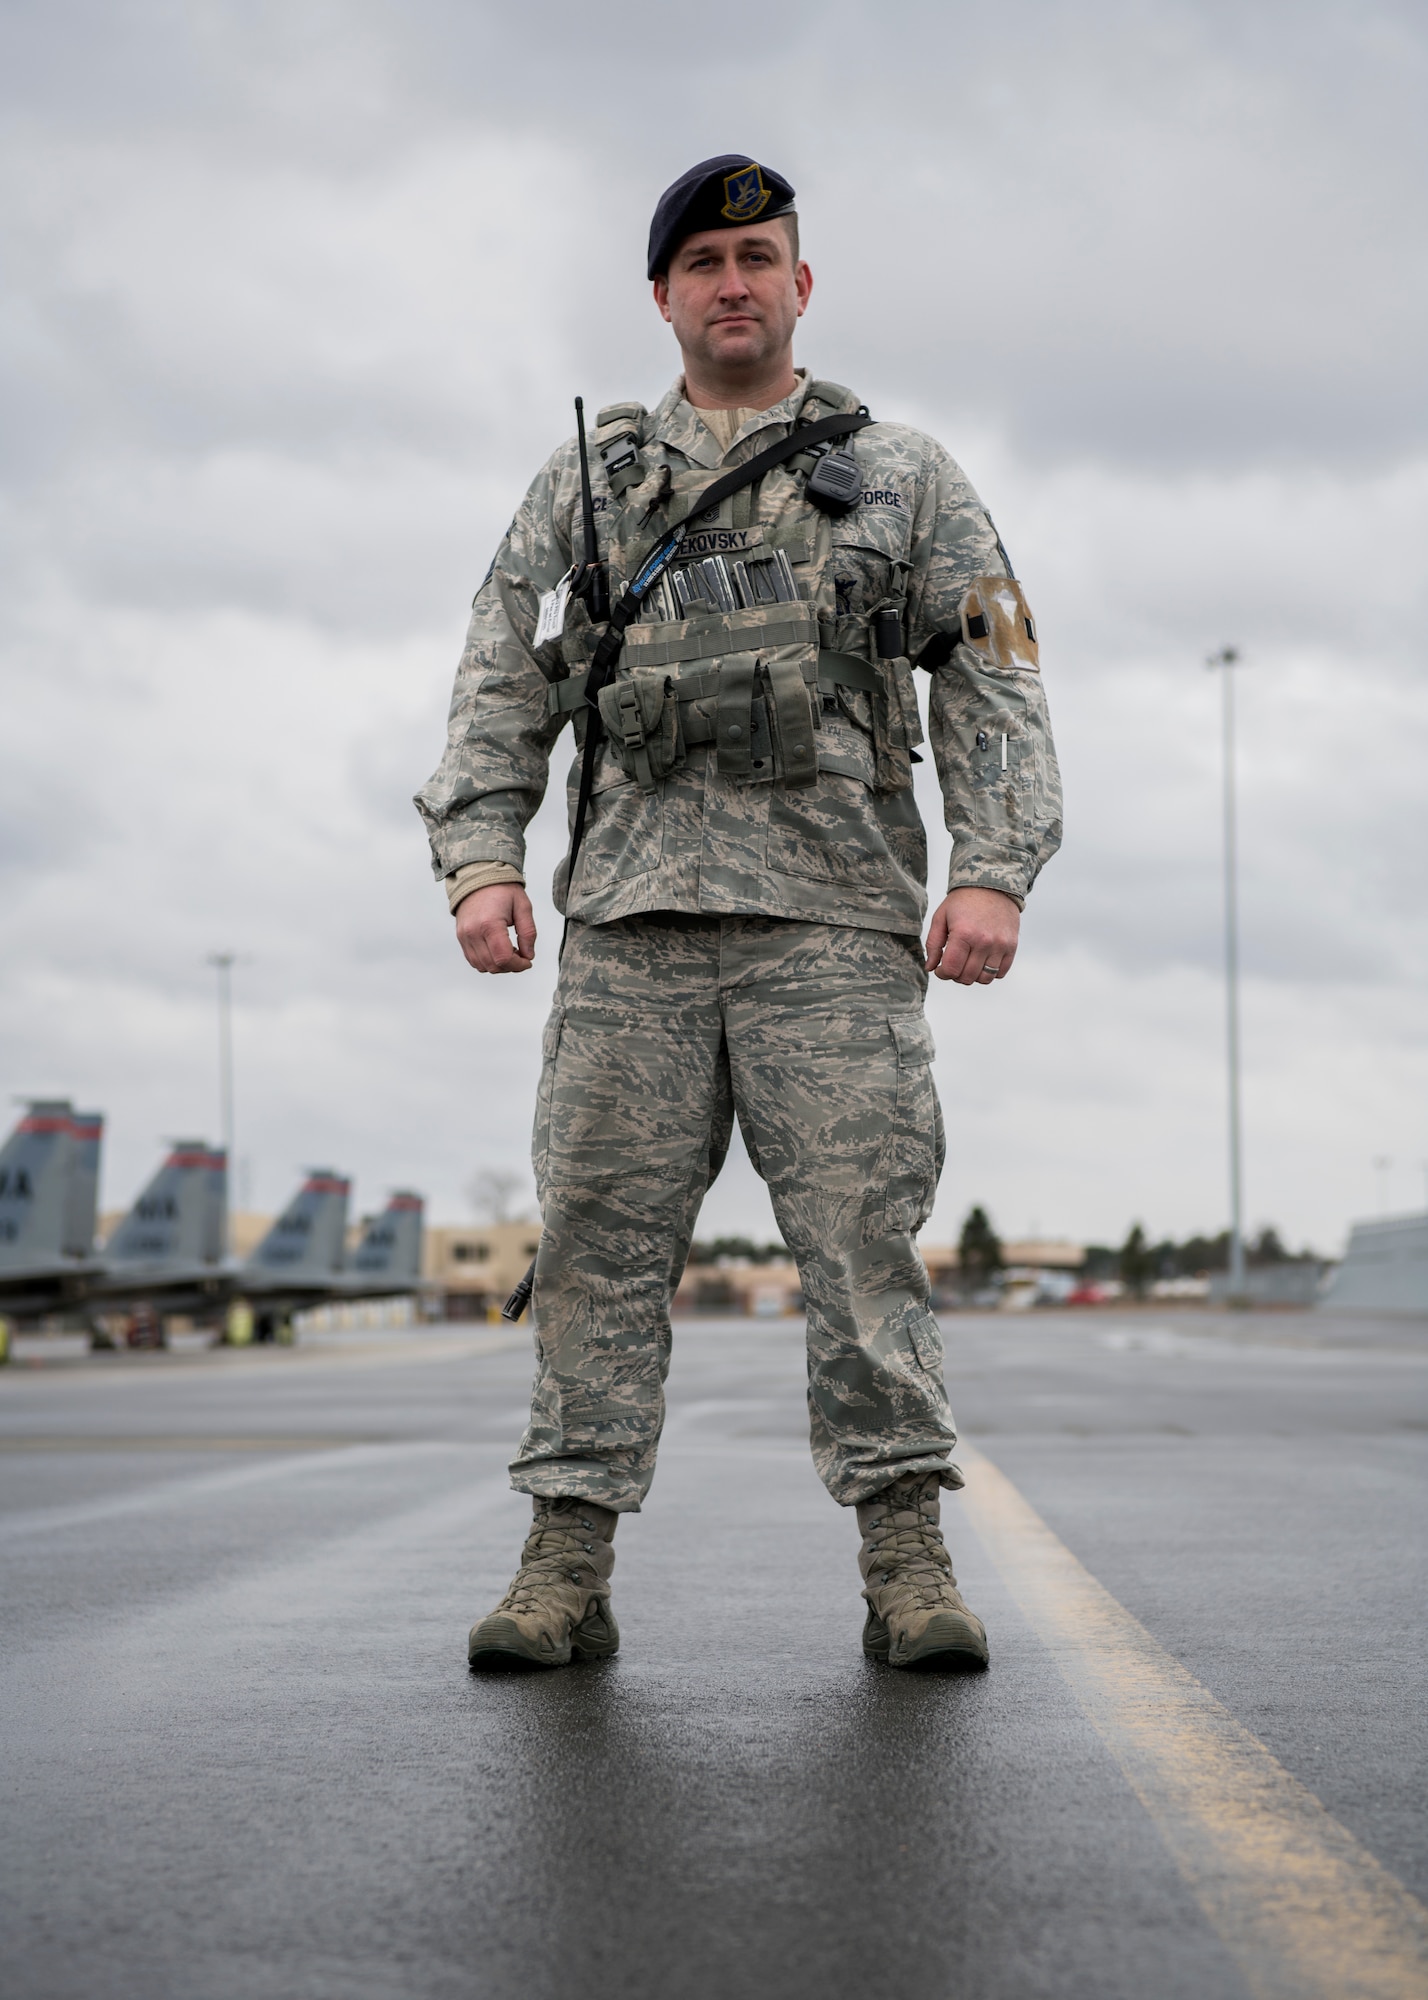 Senior Master Sgt. Andrew Cekovsky, 104th Security Forces Squadron drill status guardsman superintendent, protects the flight line Jan. 9, 2019, at Barnes Air National Guard Base, Massachusetts. Cekovsky has been with the 104th SFS for 19 years and is also a police officer with the Westfield Police Department. (U.S. Air National Guard photo by Airman 1st Class Randy Burlingame)